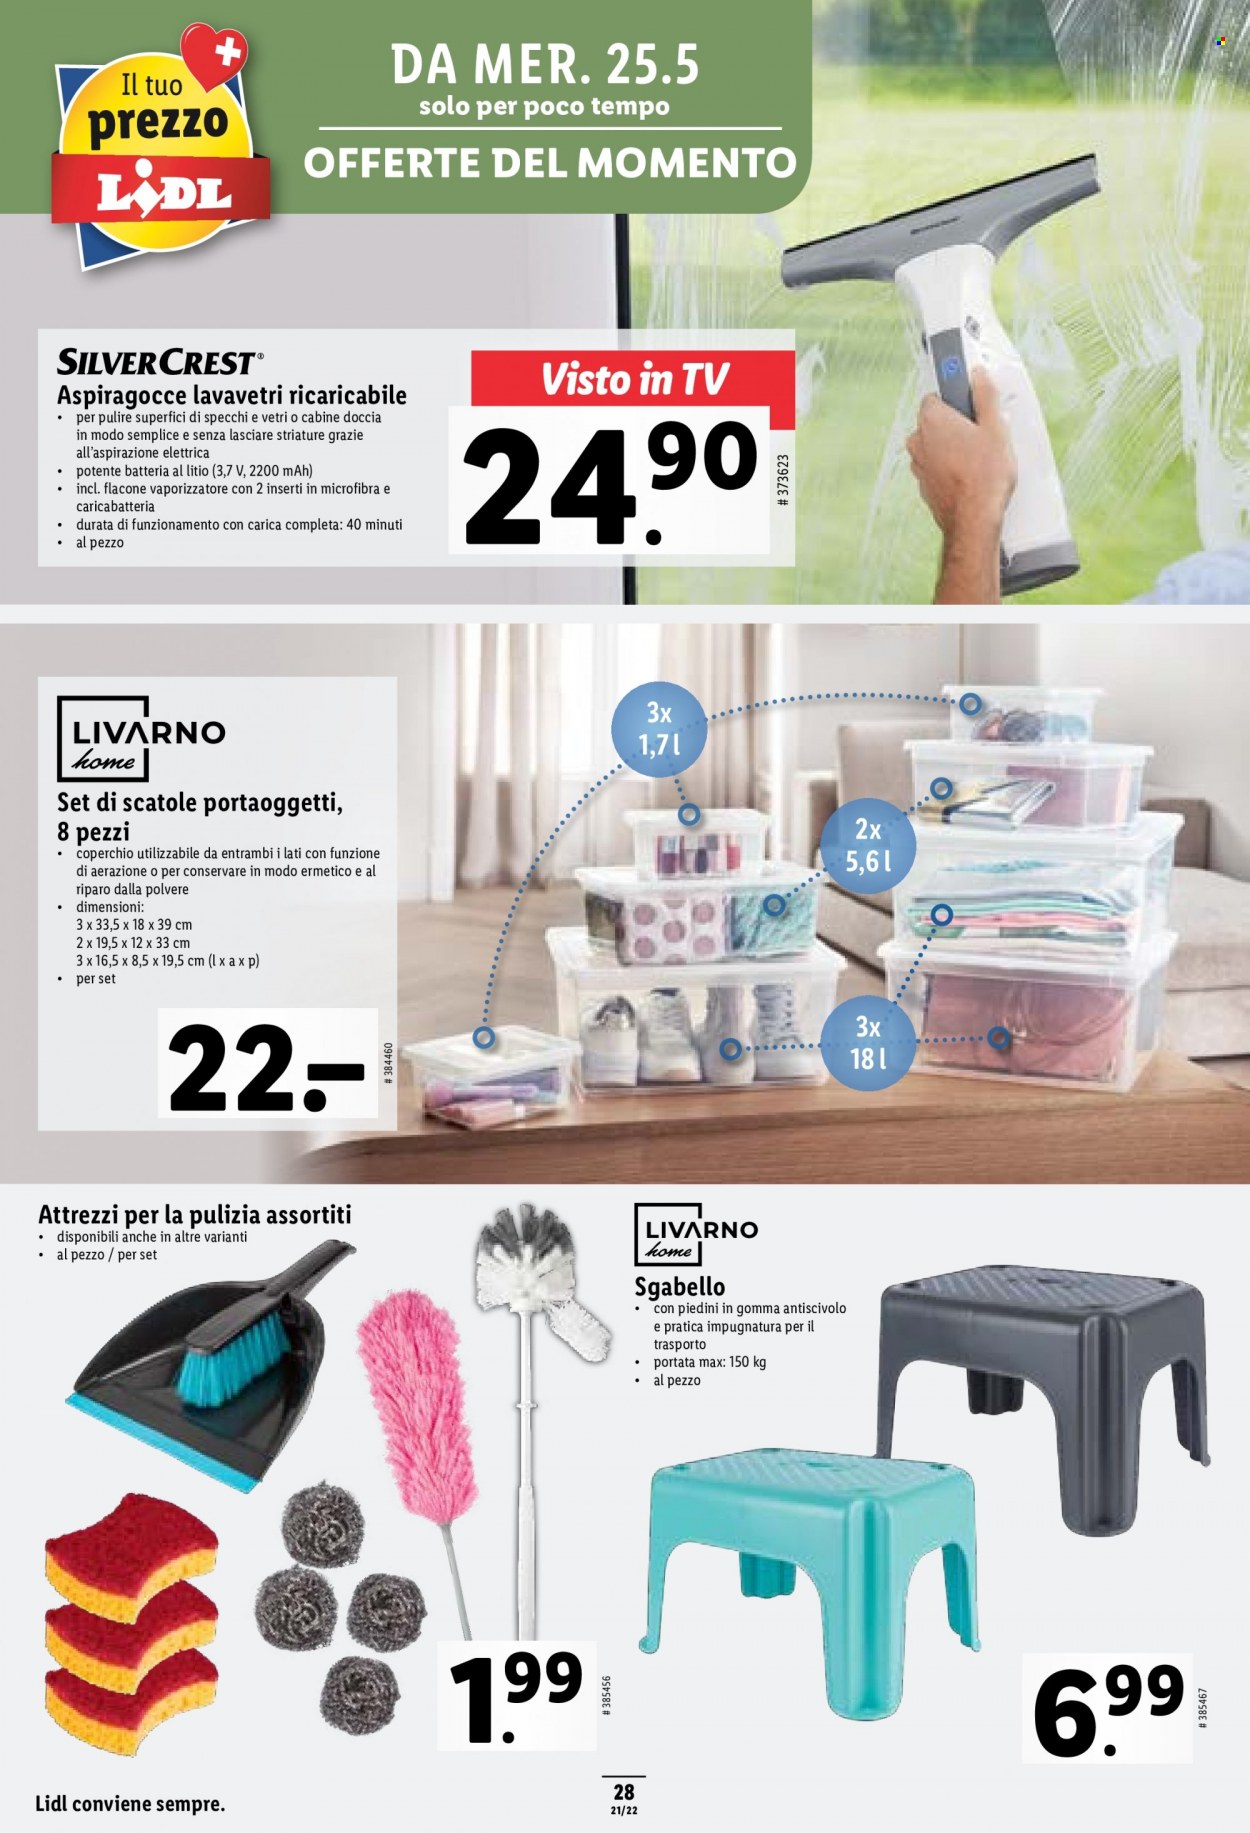 Catalogue Lidl - 25.5.2022 - 1.6.2022. Page 28.